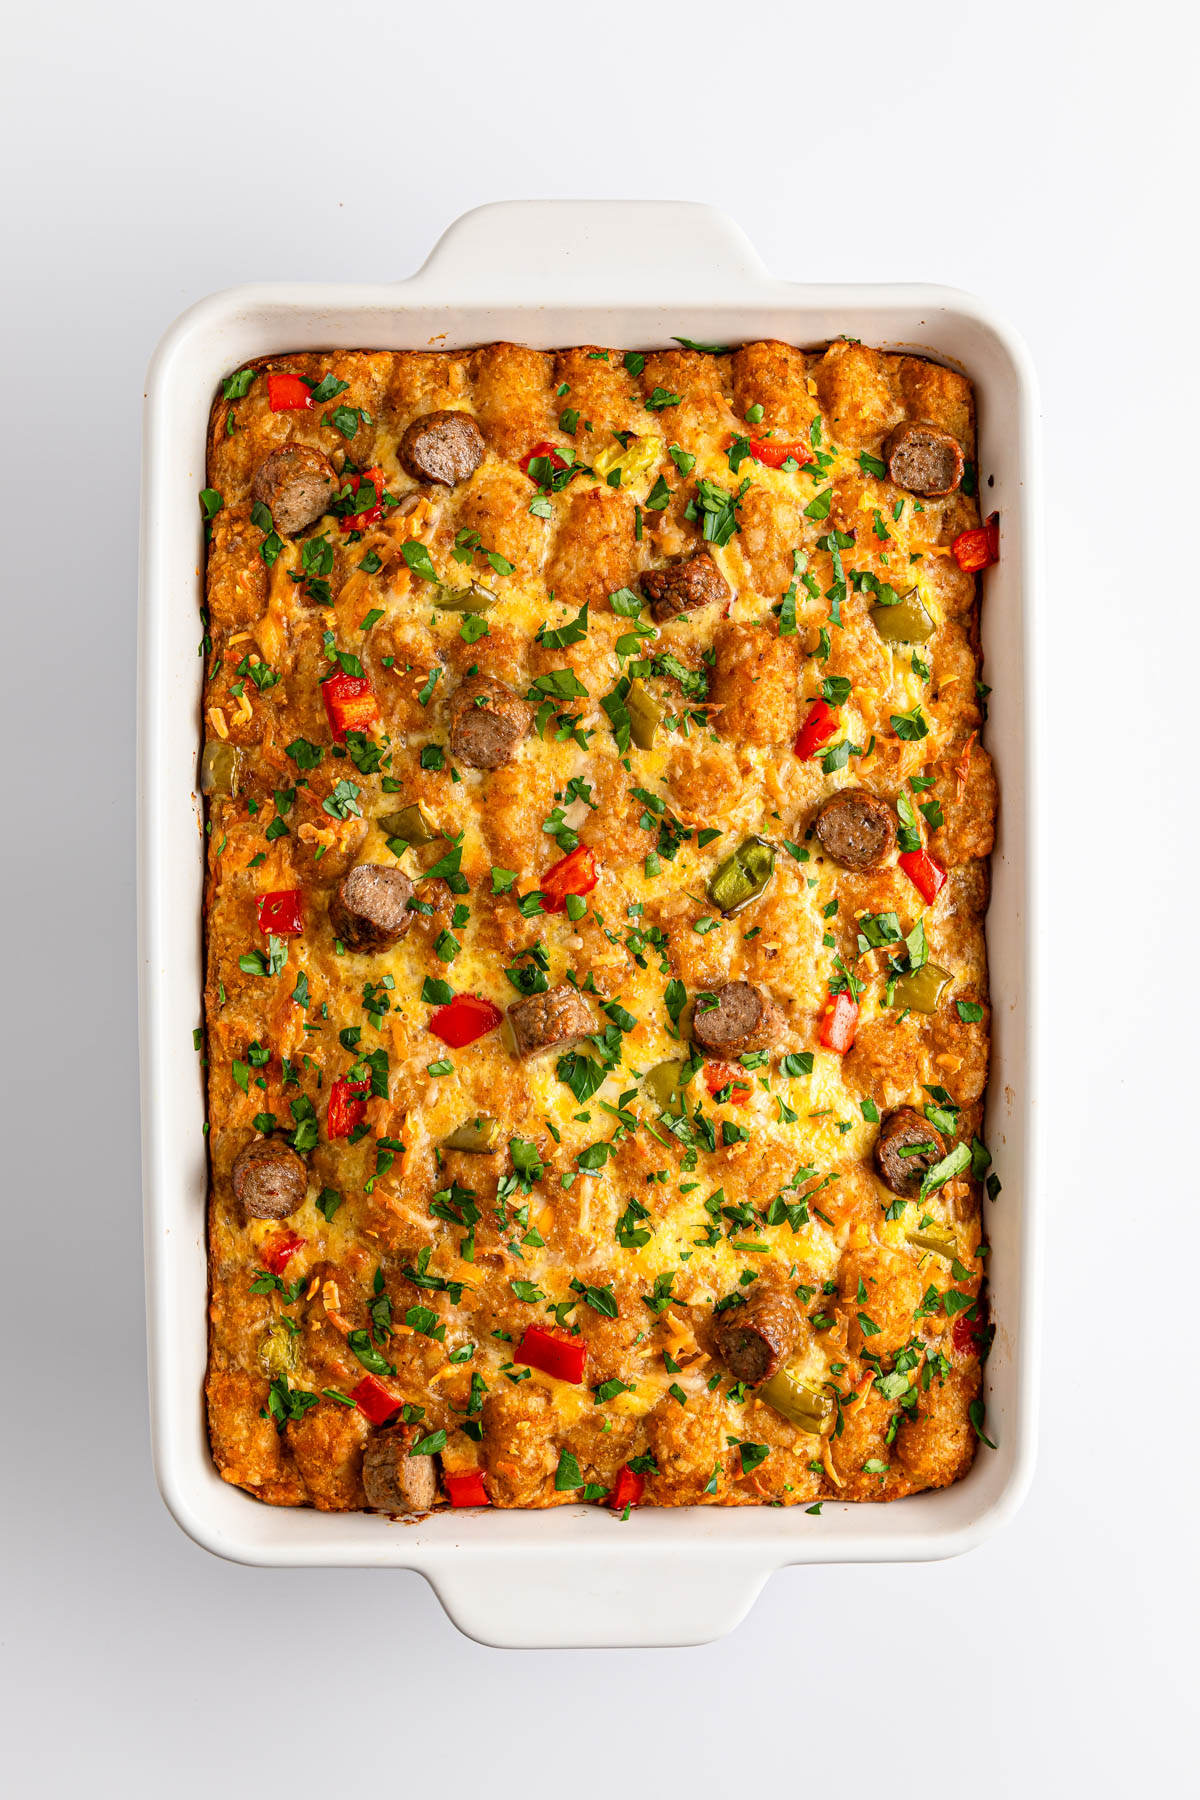 A freshly baked casserole with vegetables and sausage in a white baking dish.